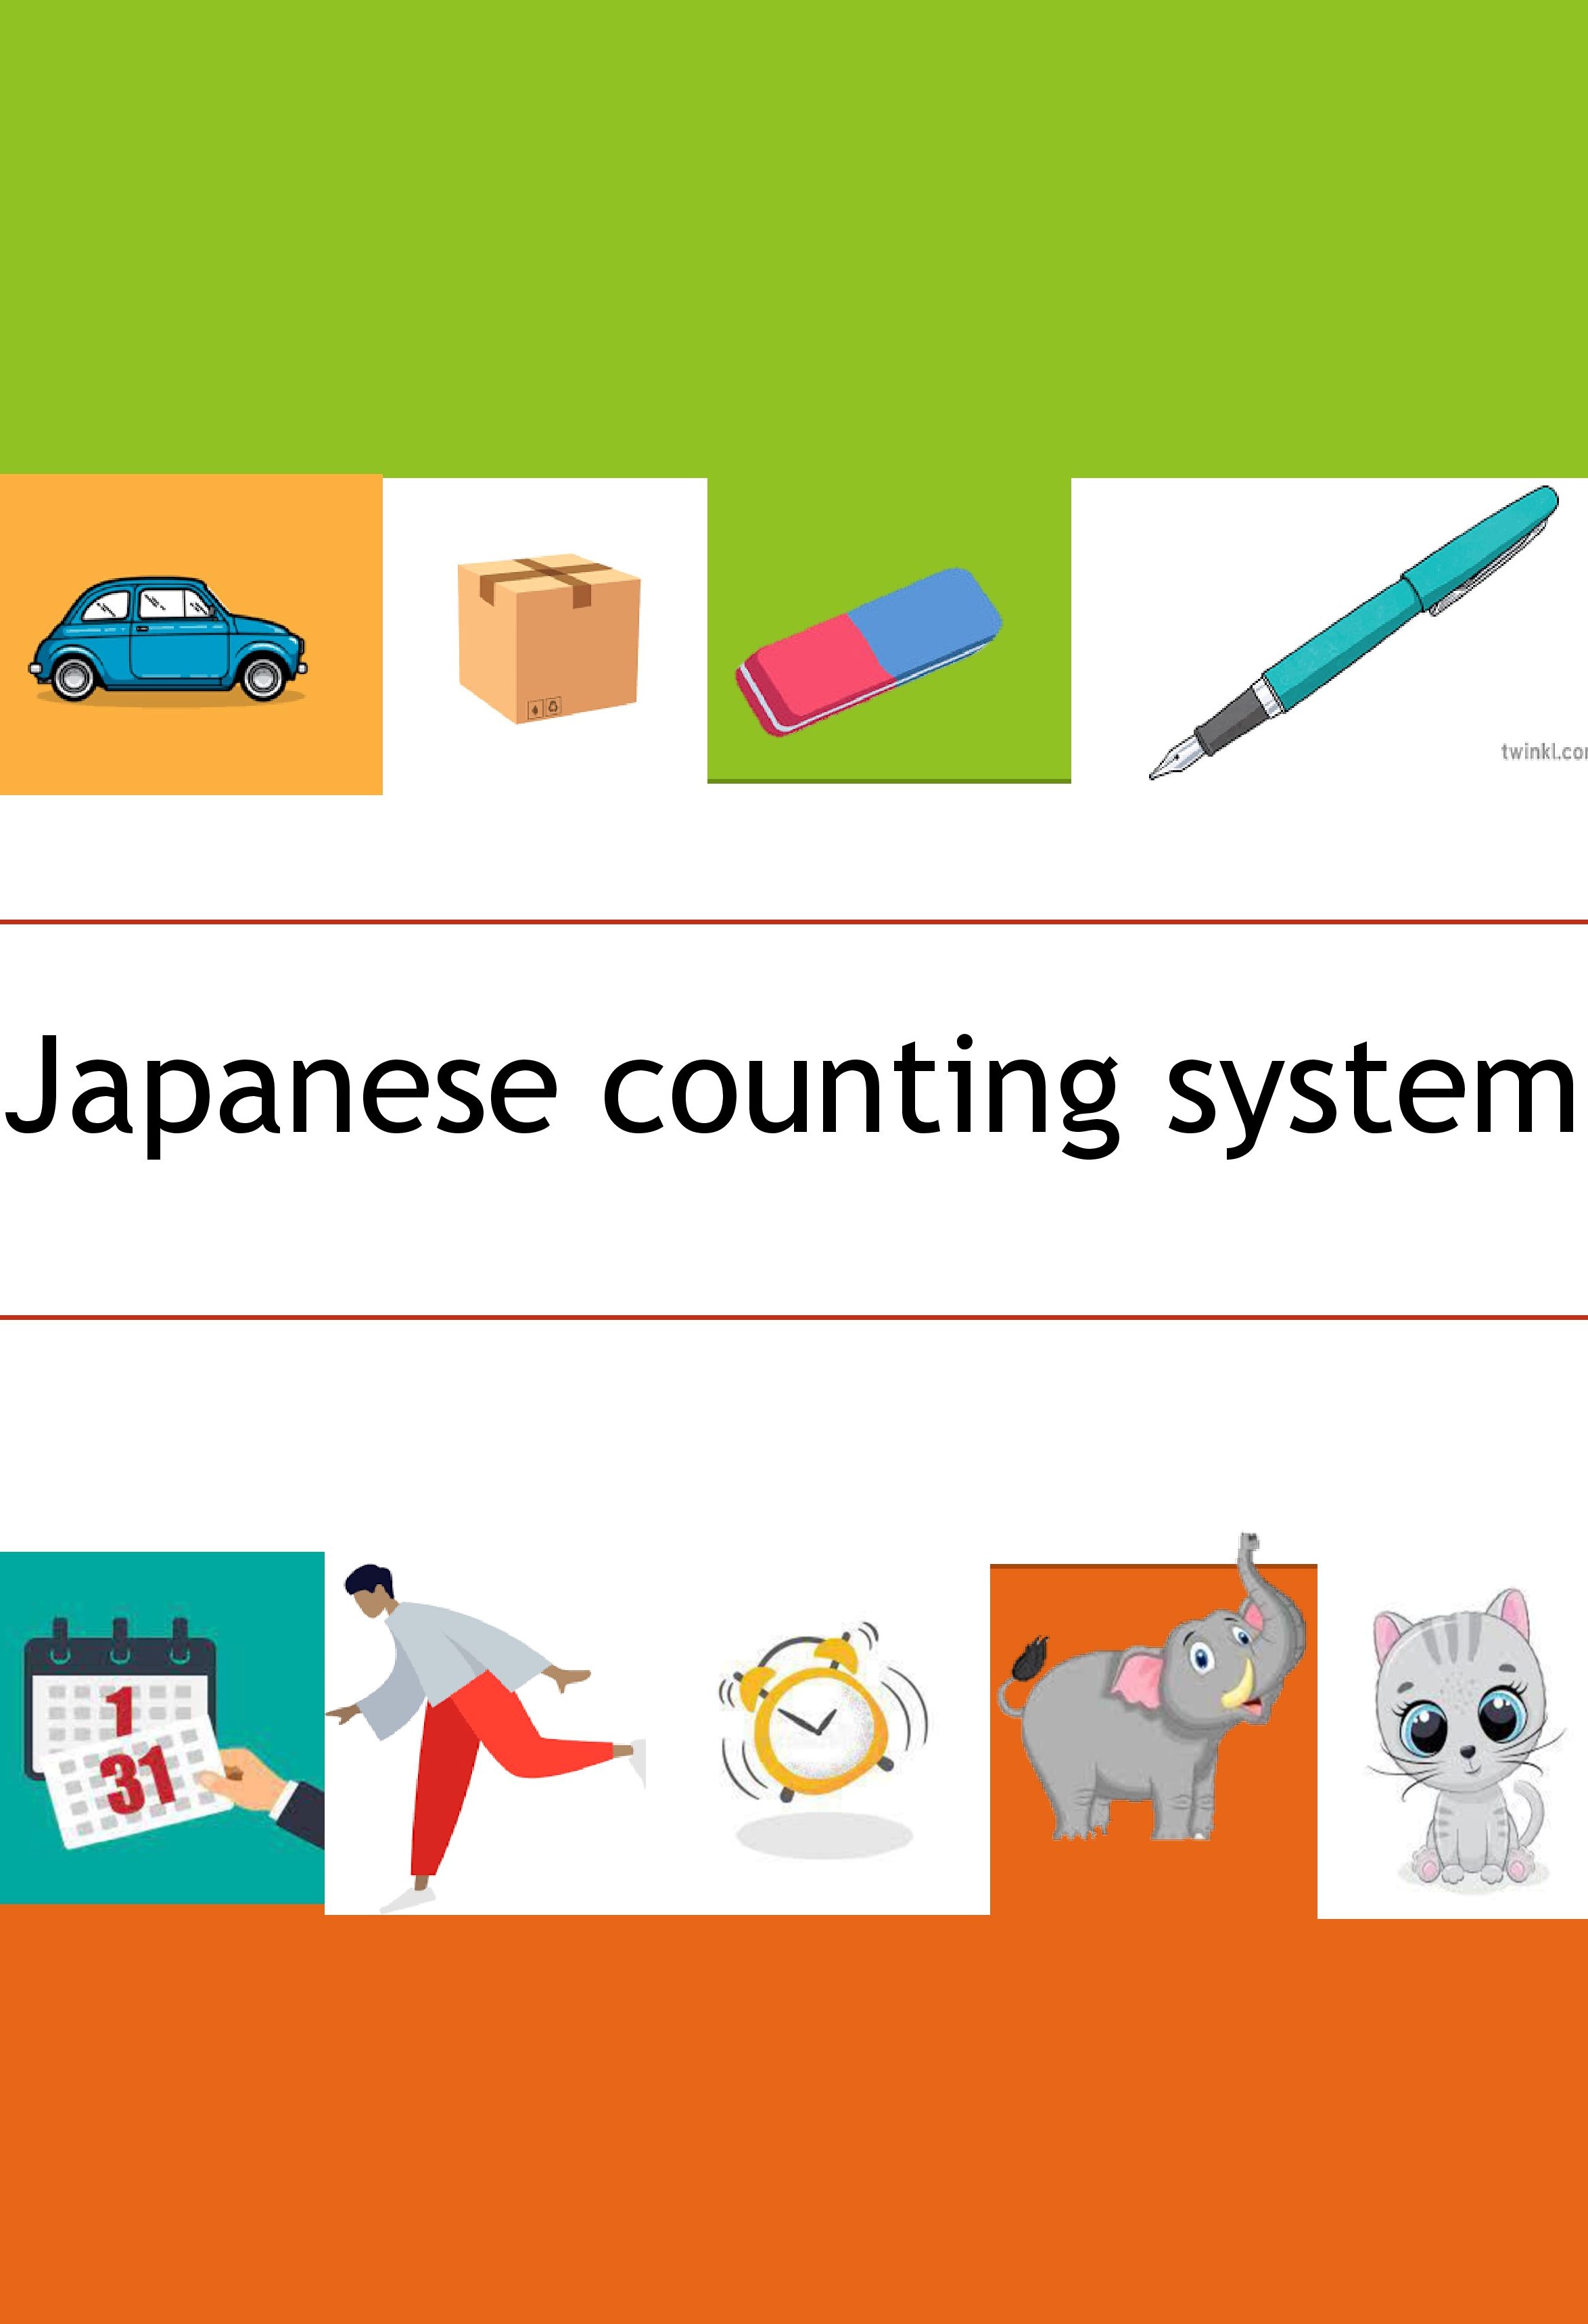 Japanese counting system